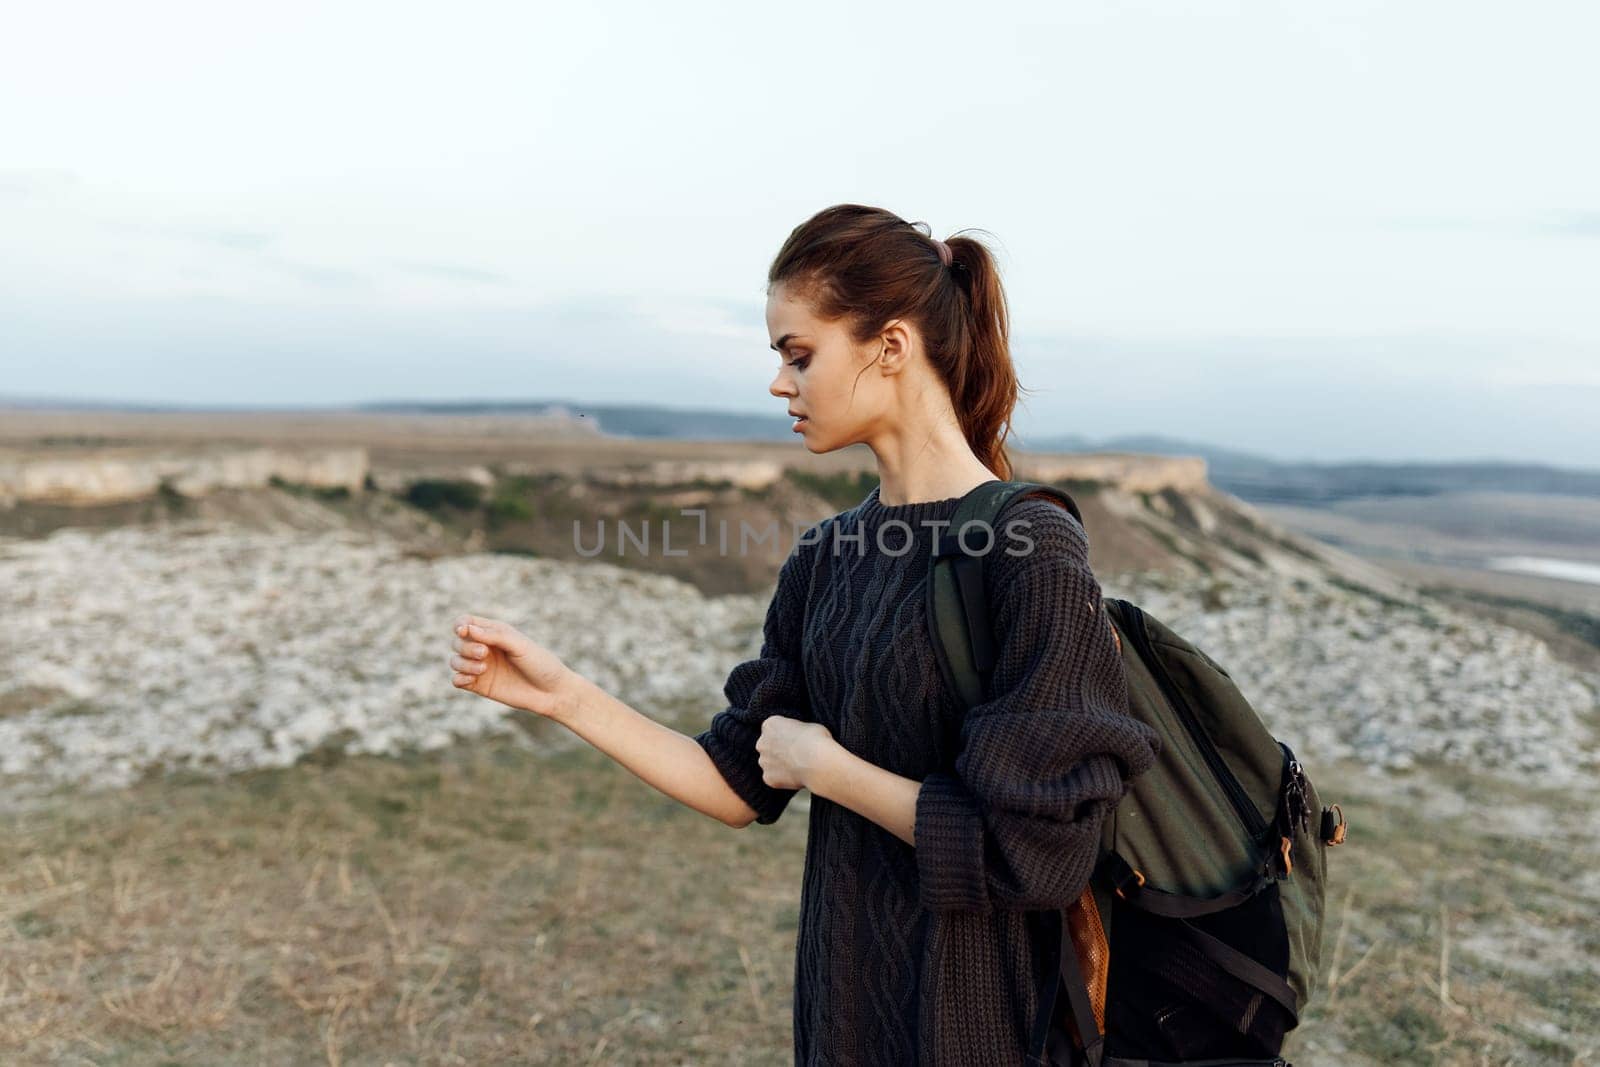 adventurous woman standing on hilltop with backpack, enjoying scenic landscape view